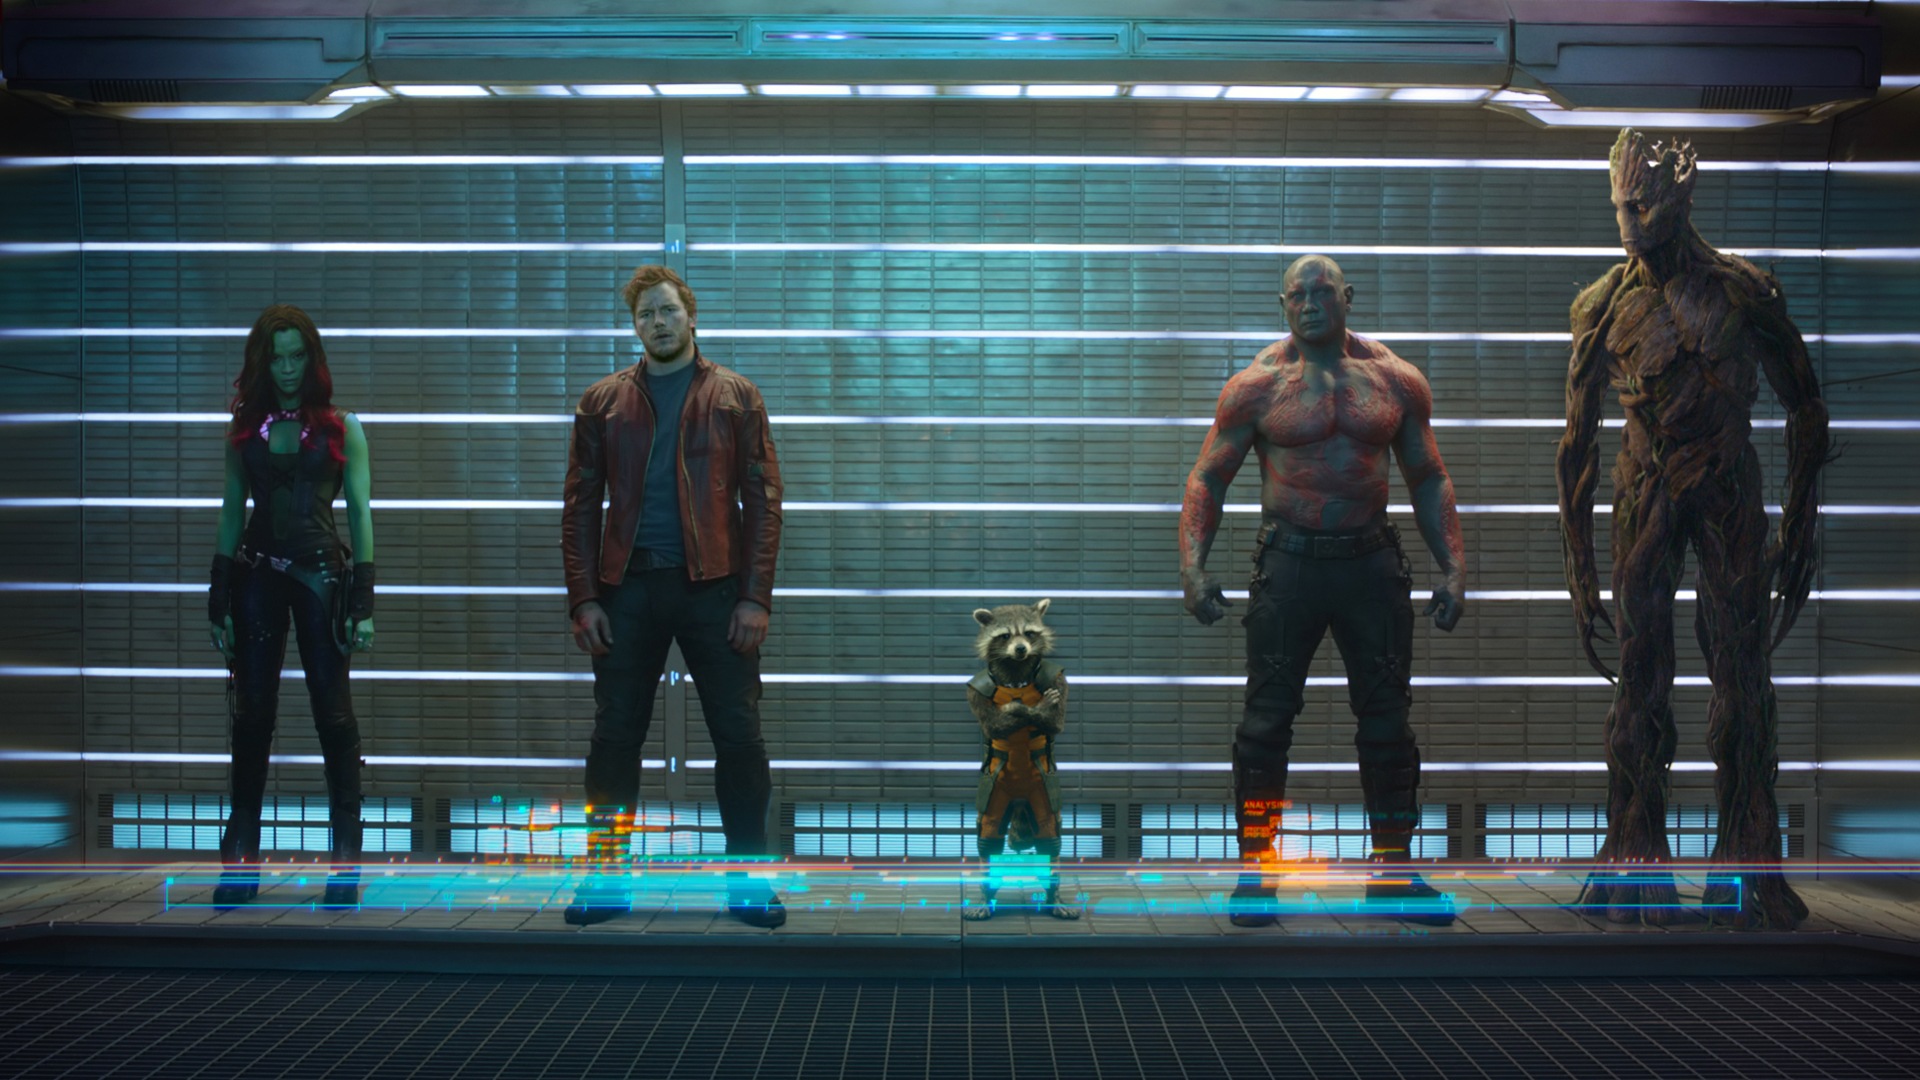 Guardians of the Galaxy 2014 HD movie wallpapers #5 - 1920x1080